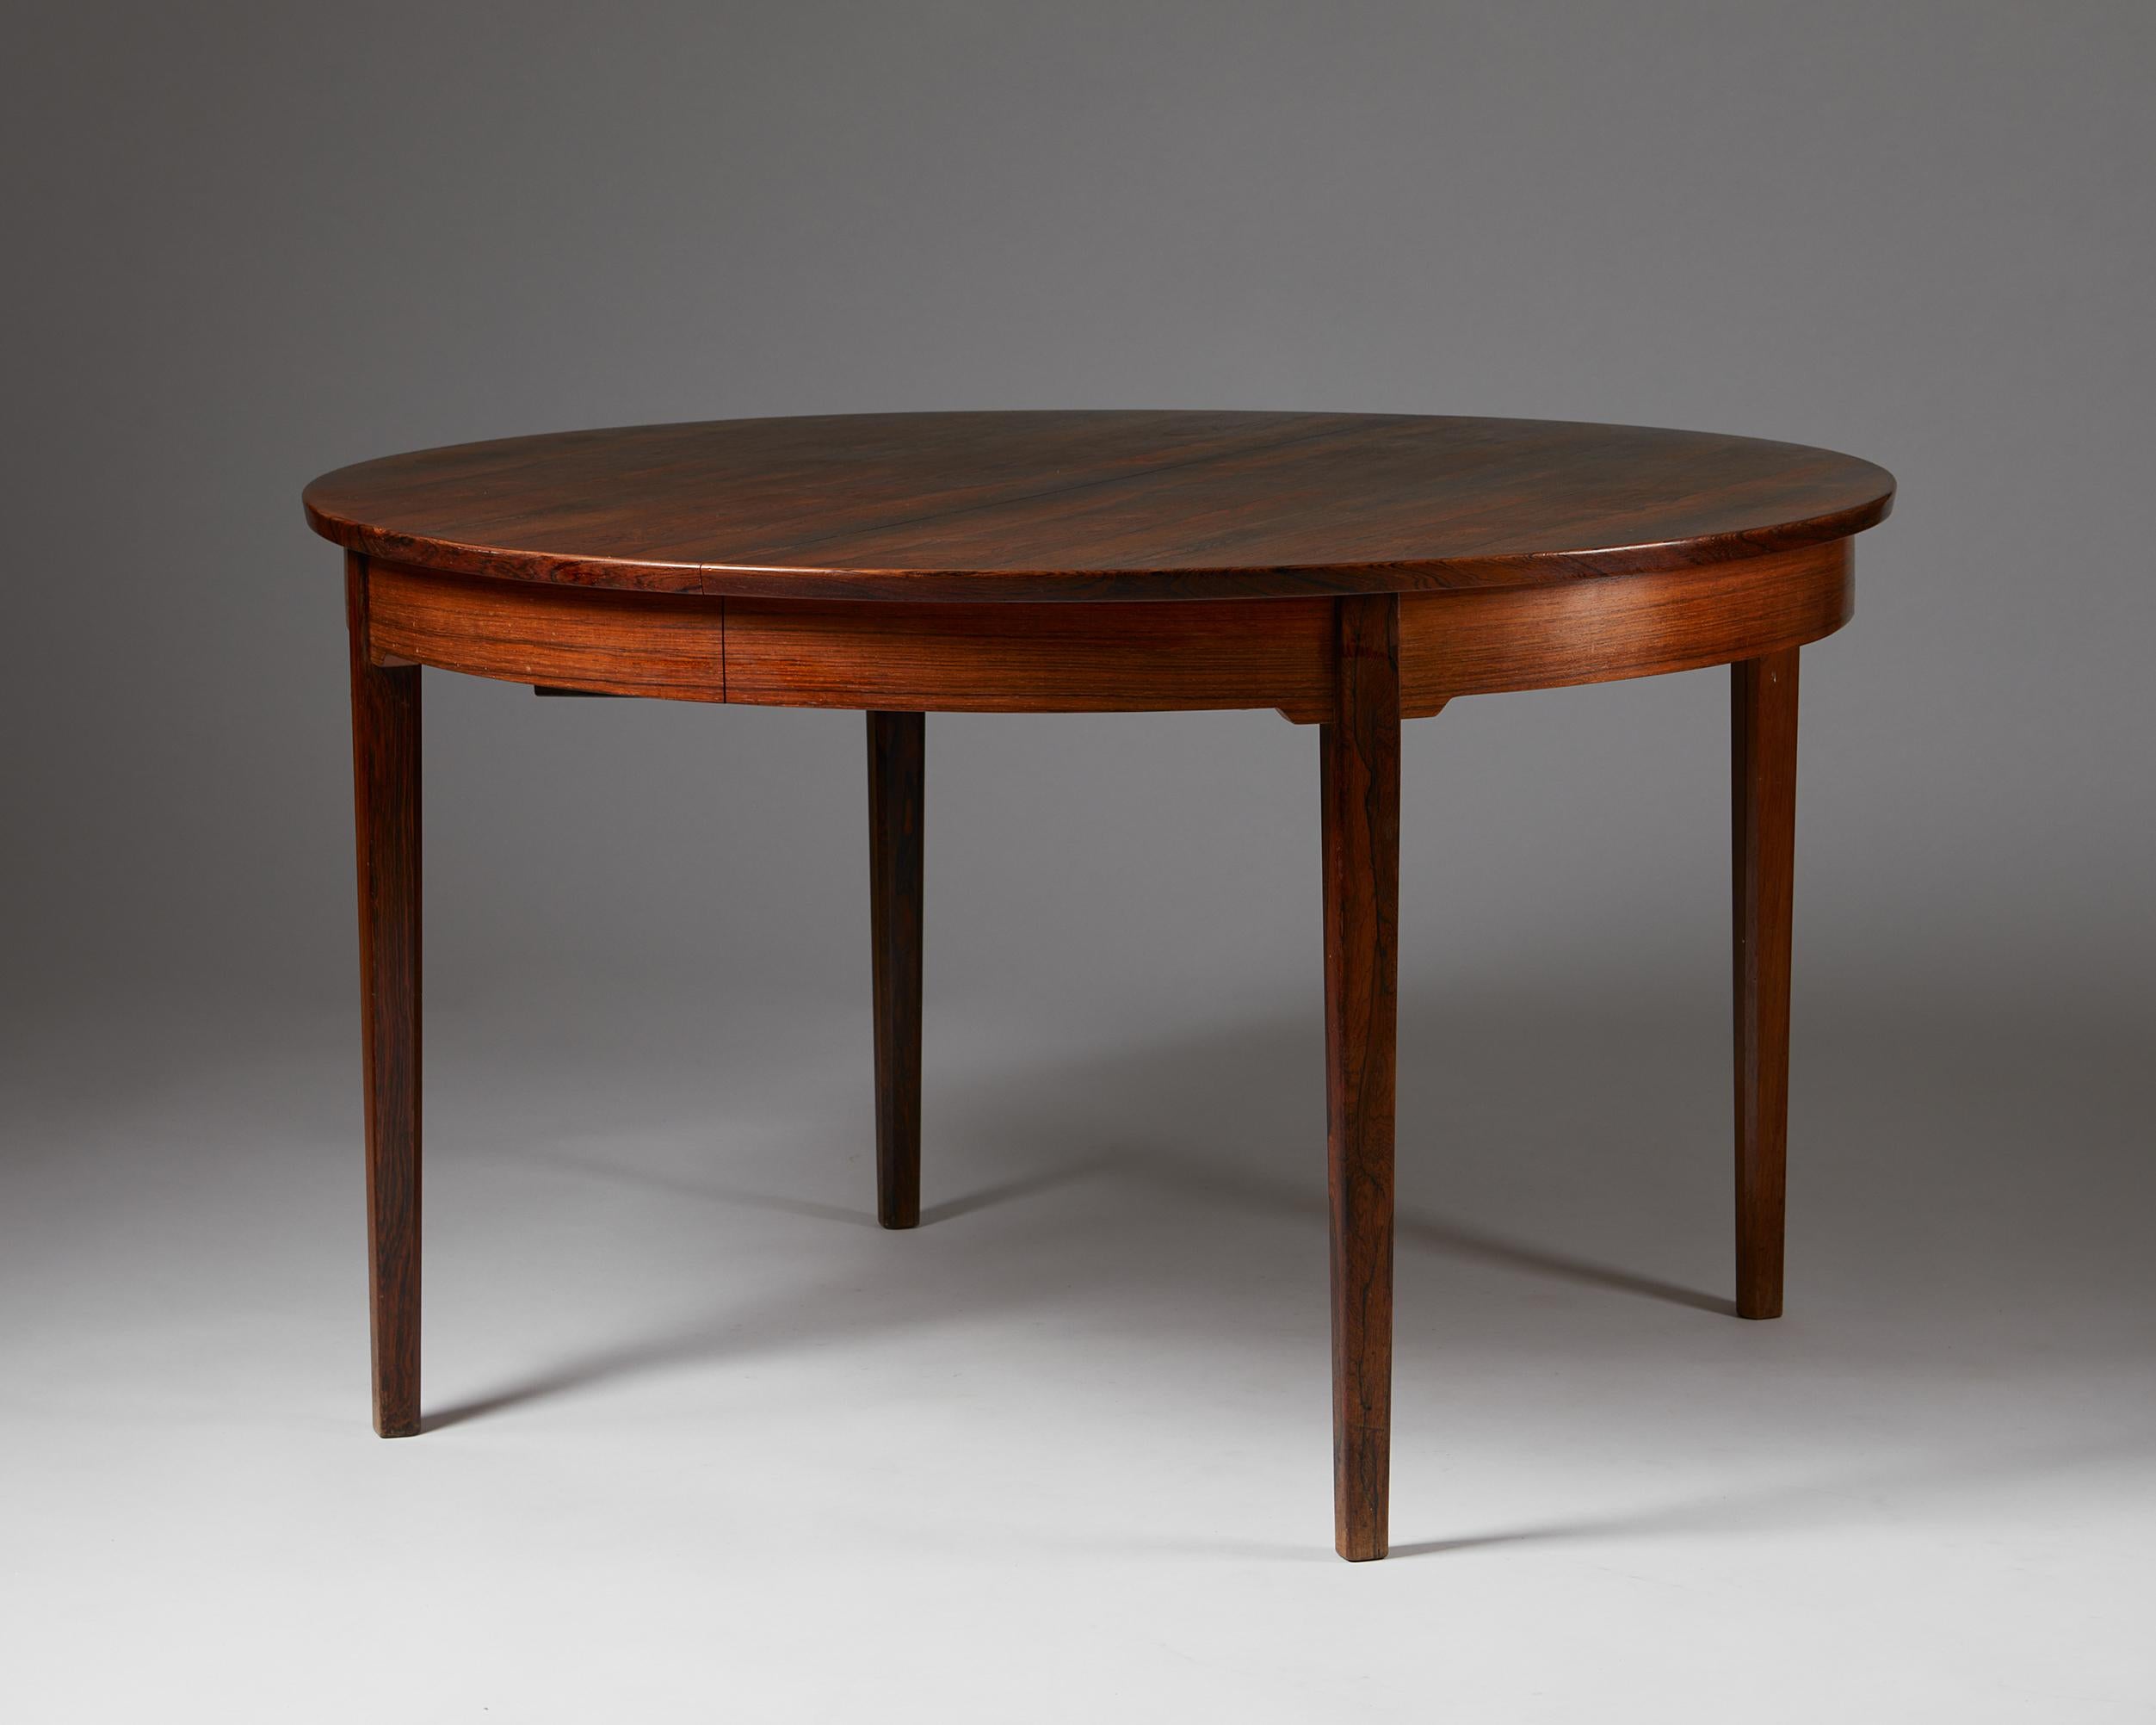 Dining table designed by Erik Wørts for Wørts,
Denmark. 1950s.
Brazilian rosewood.

This elegant dining table in Brazilian rosewood is round in its unextended form and becomes a large oval that easily seats twelve people once extended. The